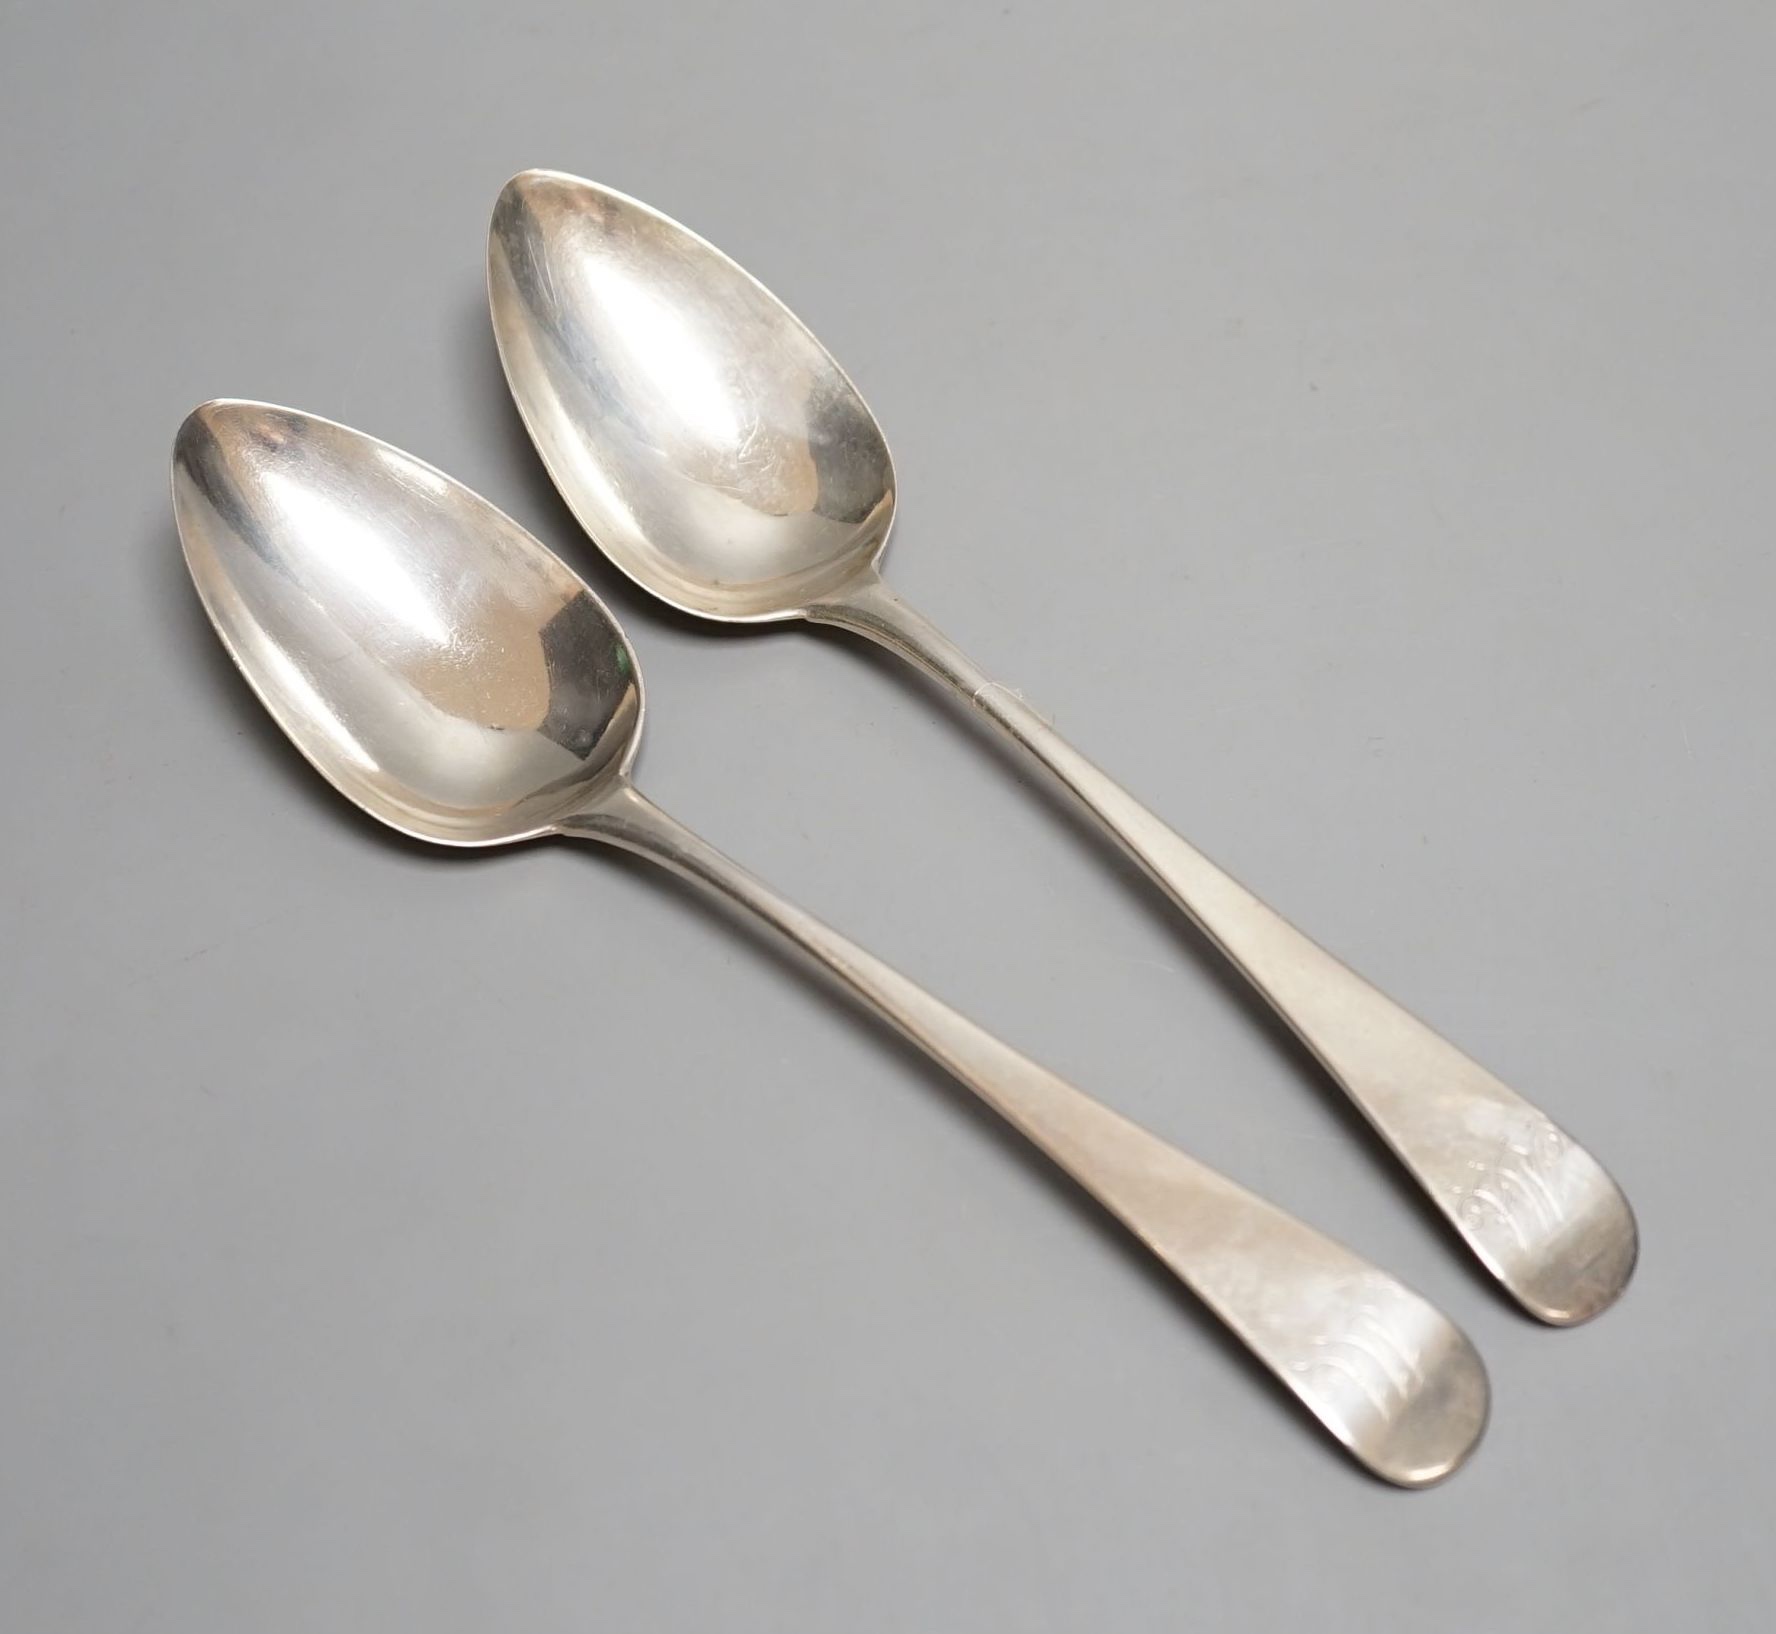 A pair of George III silver Old English pattern tablespoons, Peter & William Bateman, London, 1807, 4oz, with engraved initial.